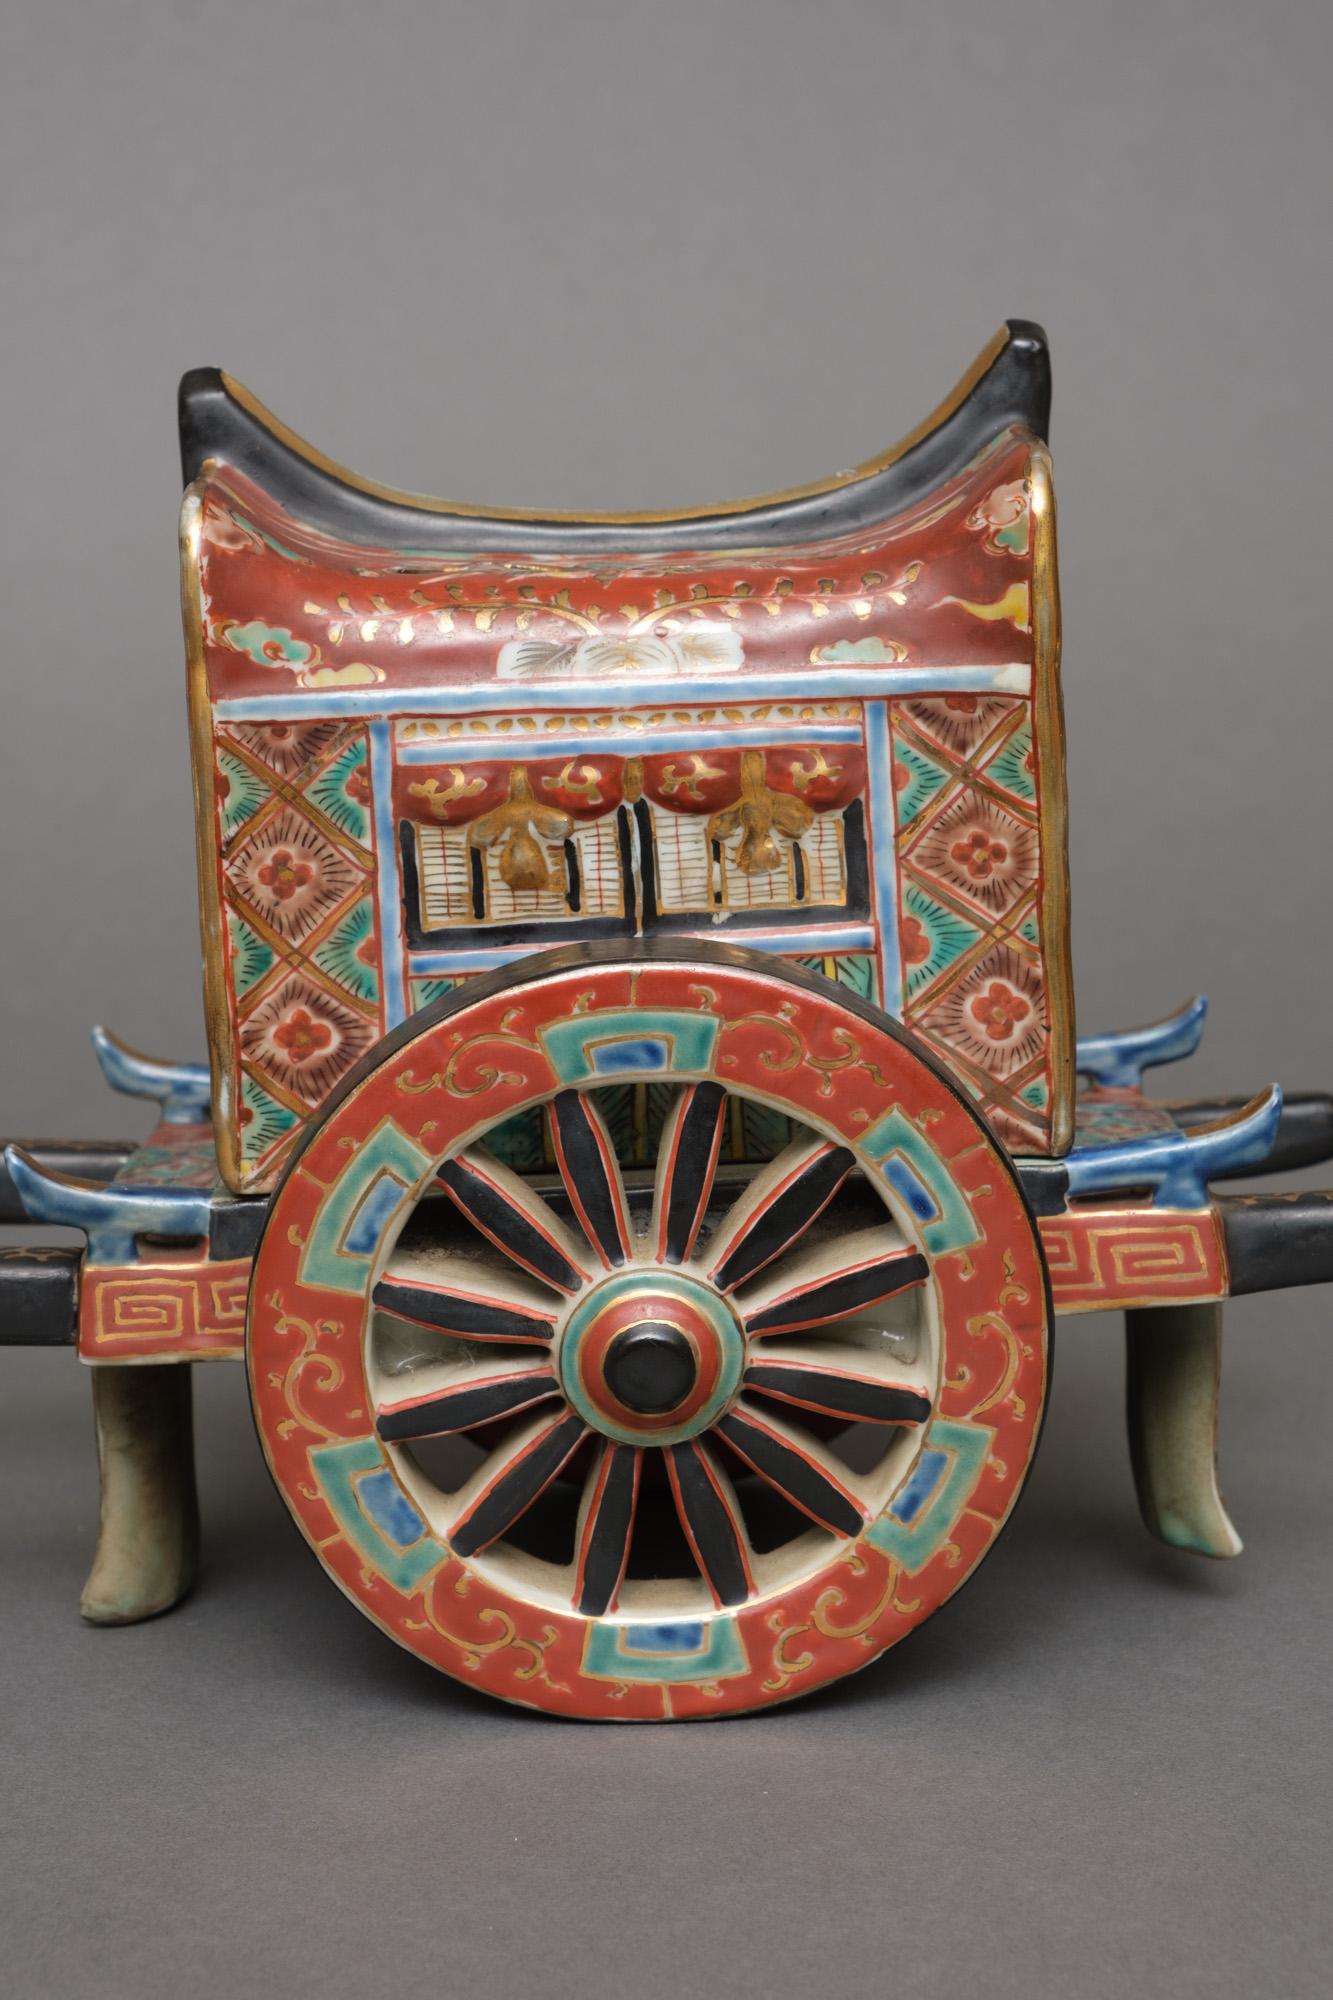 A wonderful and delicate Kyô’yaki porcelain kôro (incense burner) in the form of a gosho’guruma (ox-drawn carriage for Heian-era nobles).

Constructed in several detachable sections, decorated with geometric and floral designs in green, iron-red,